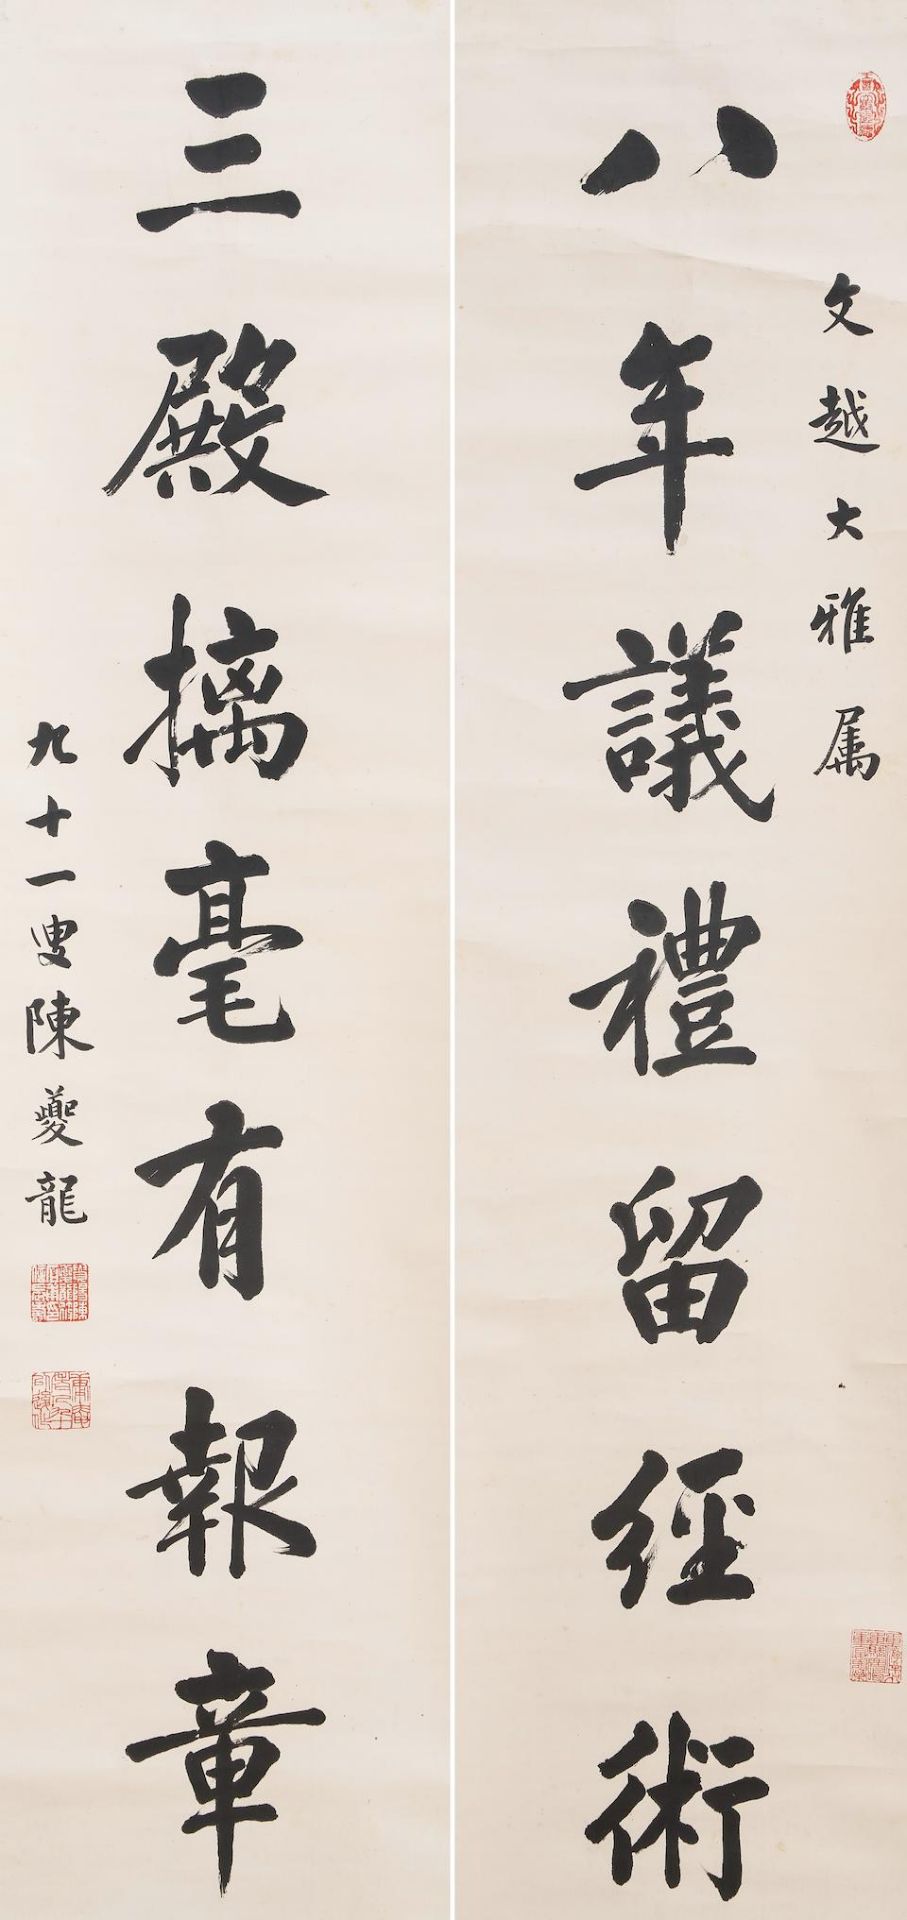 Chen Kuilong (1857-1948), Calligraphy in Regular Style (2)